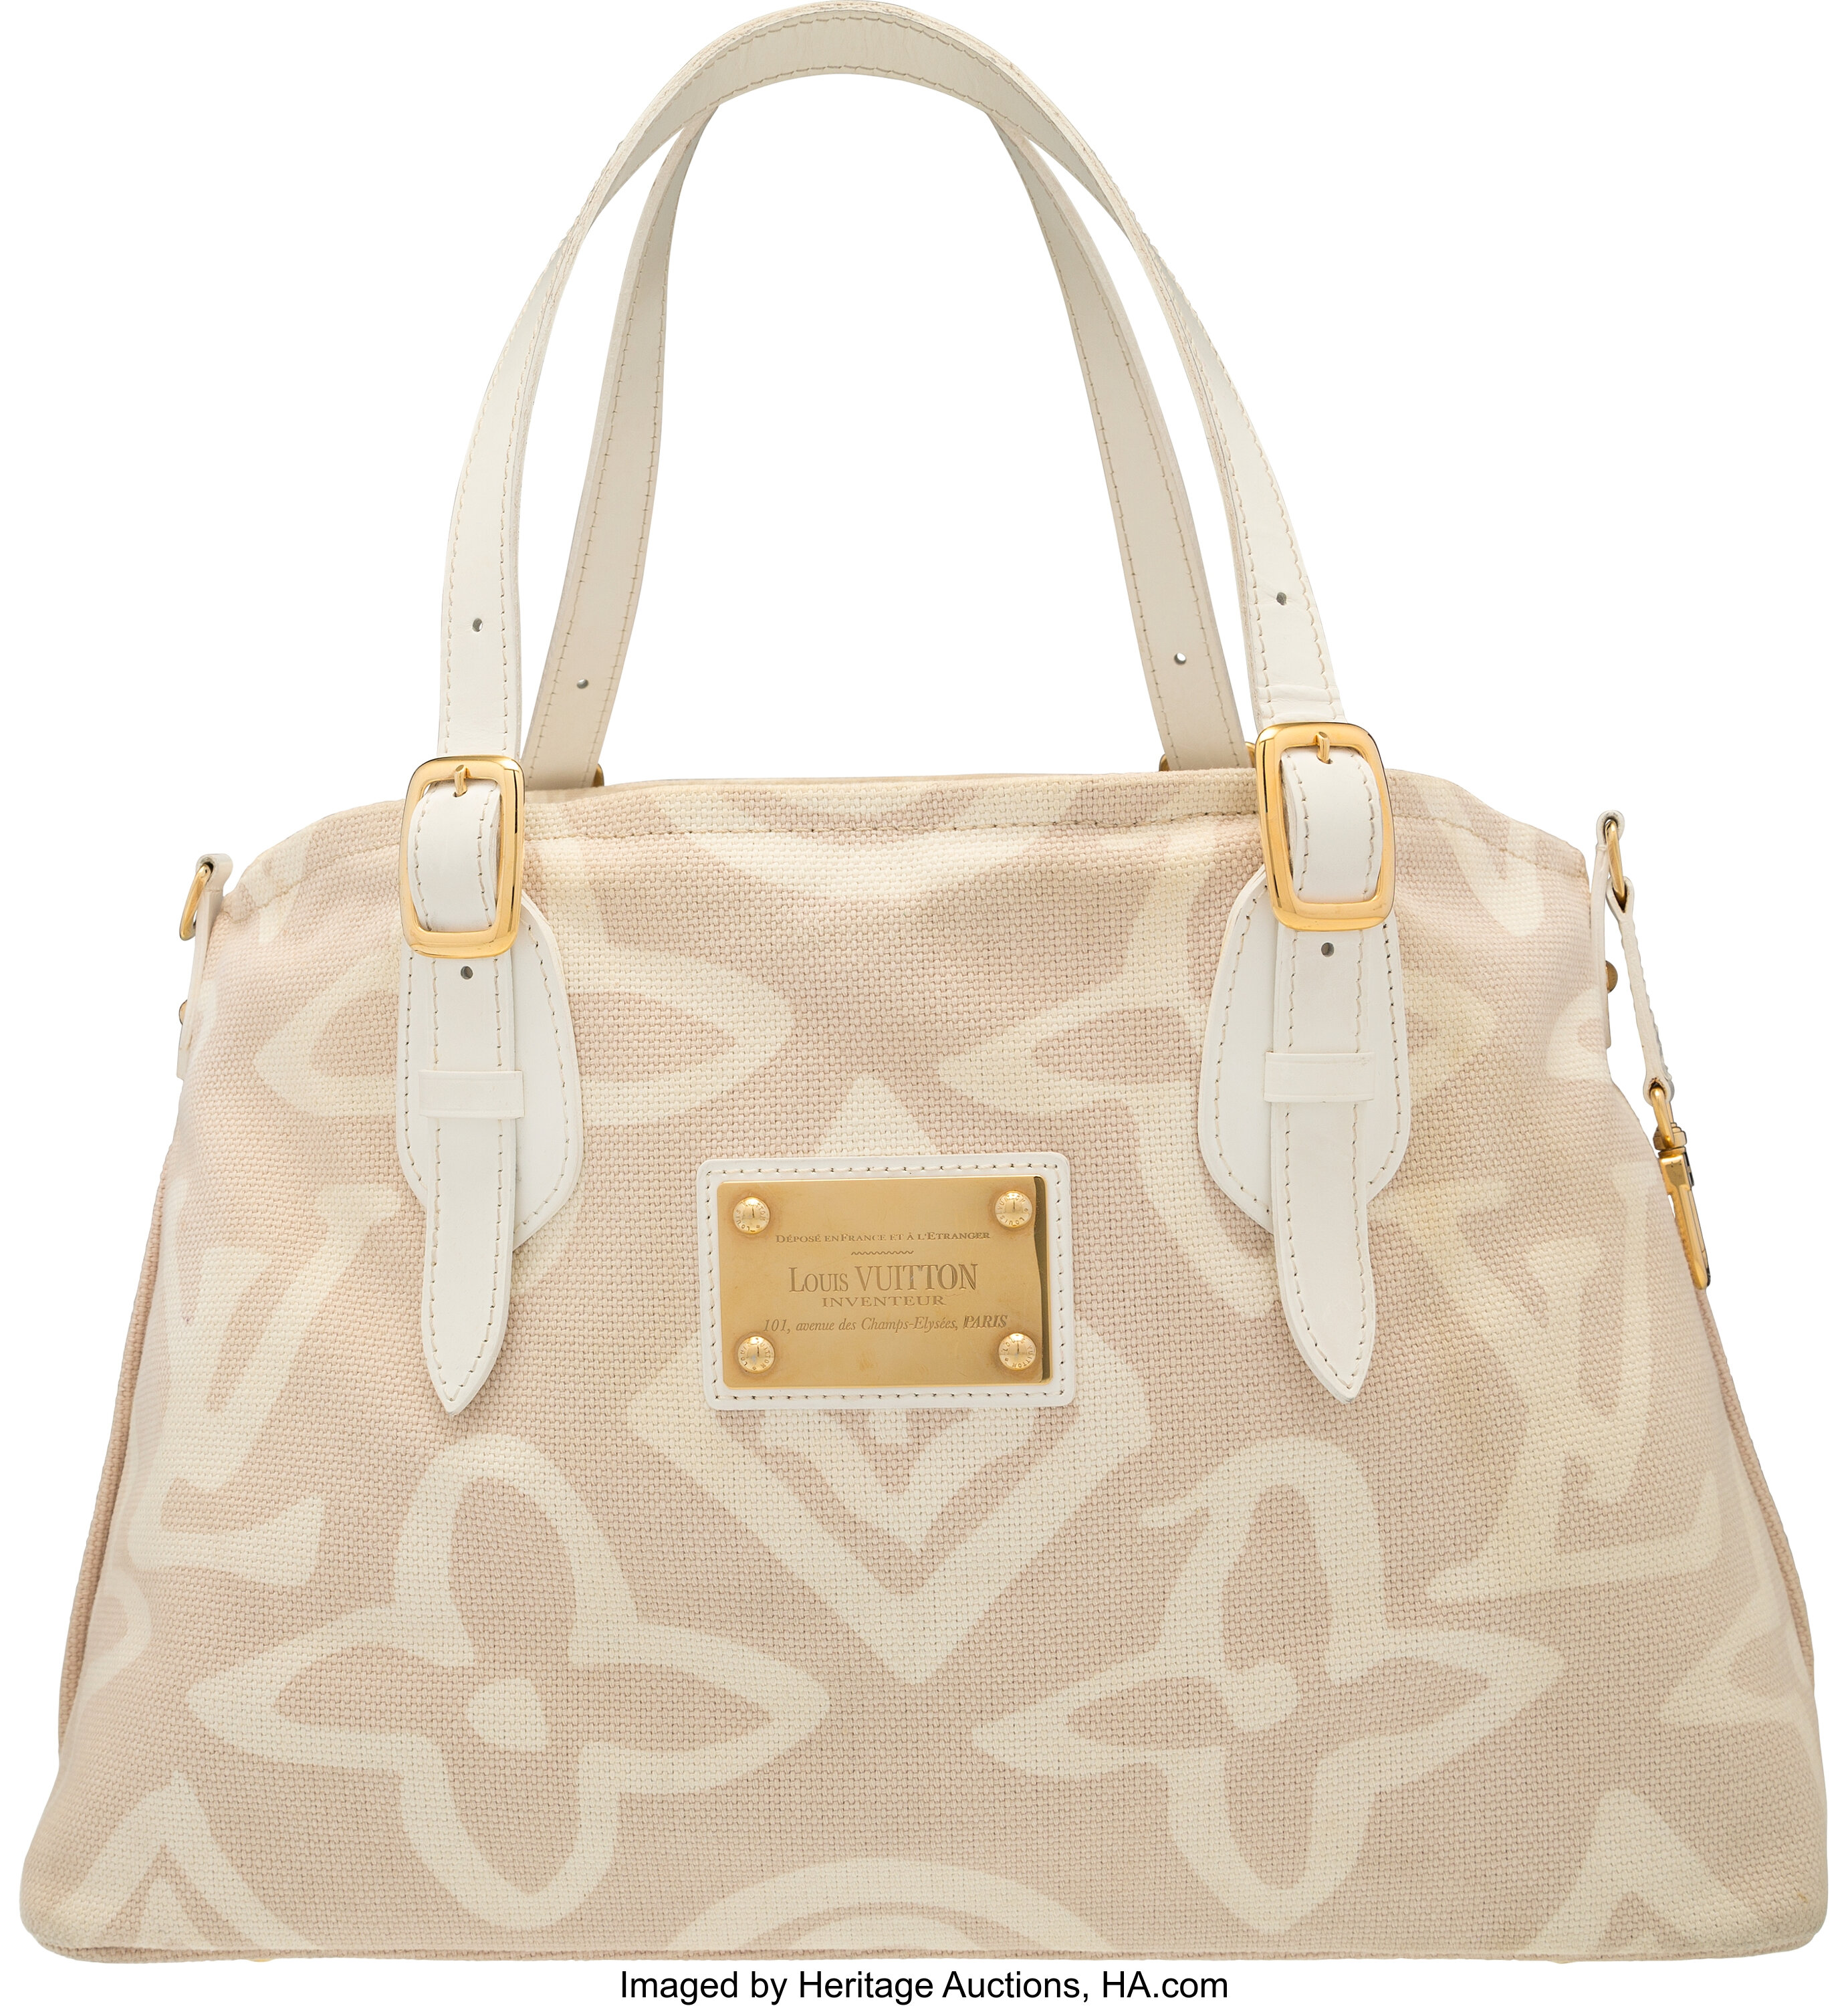 Louis Vuitton Beige & White Canvas Tote Bag. Very Good Condition